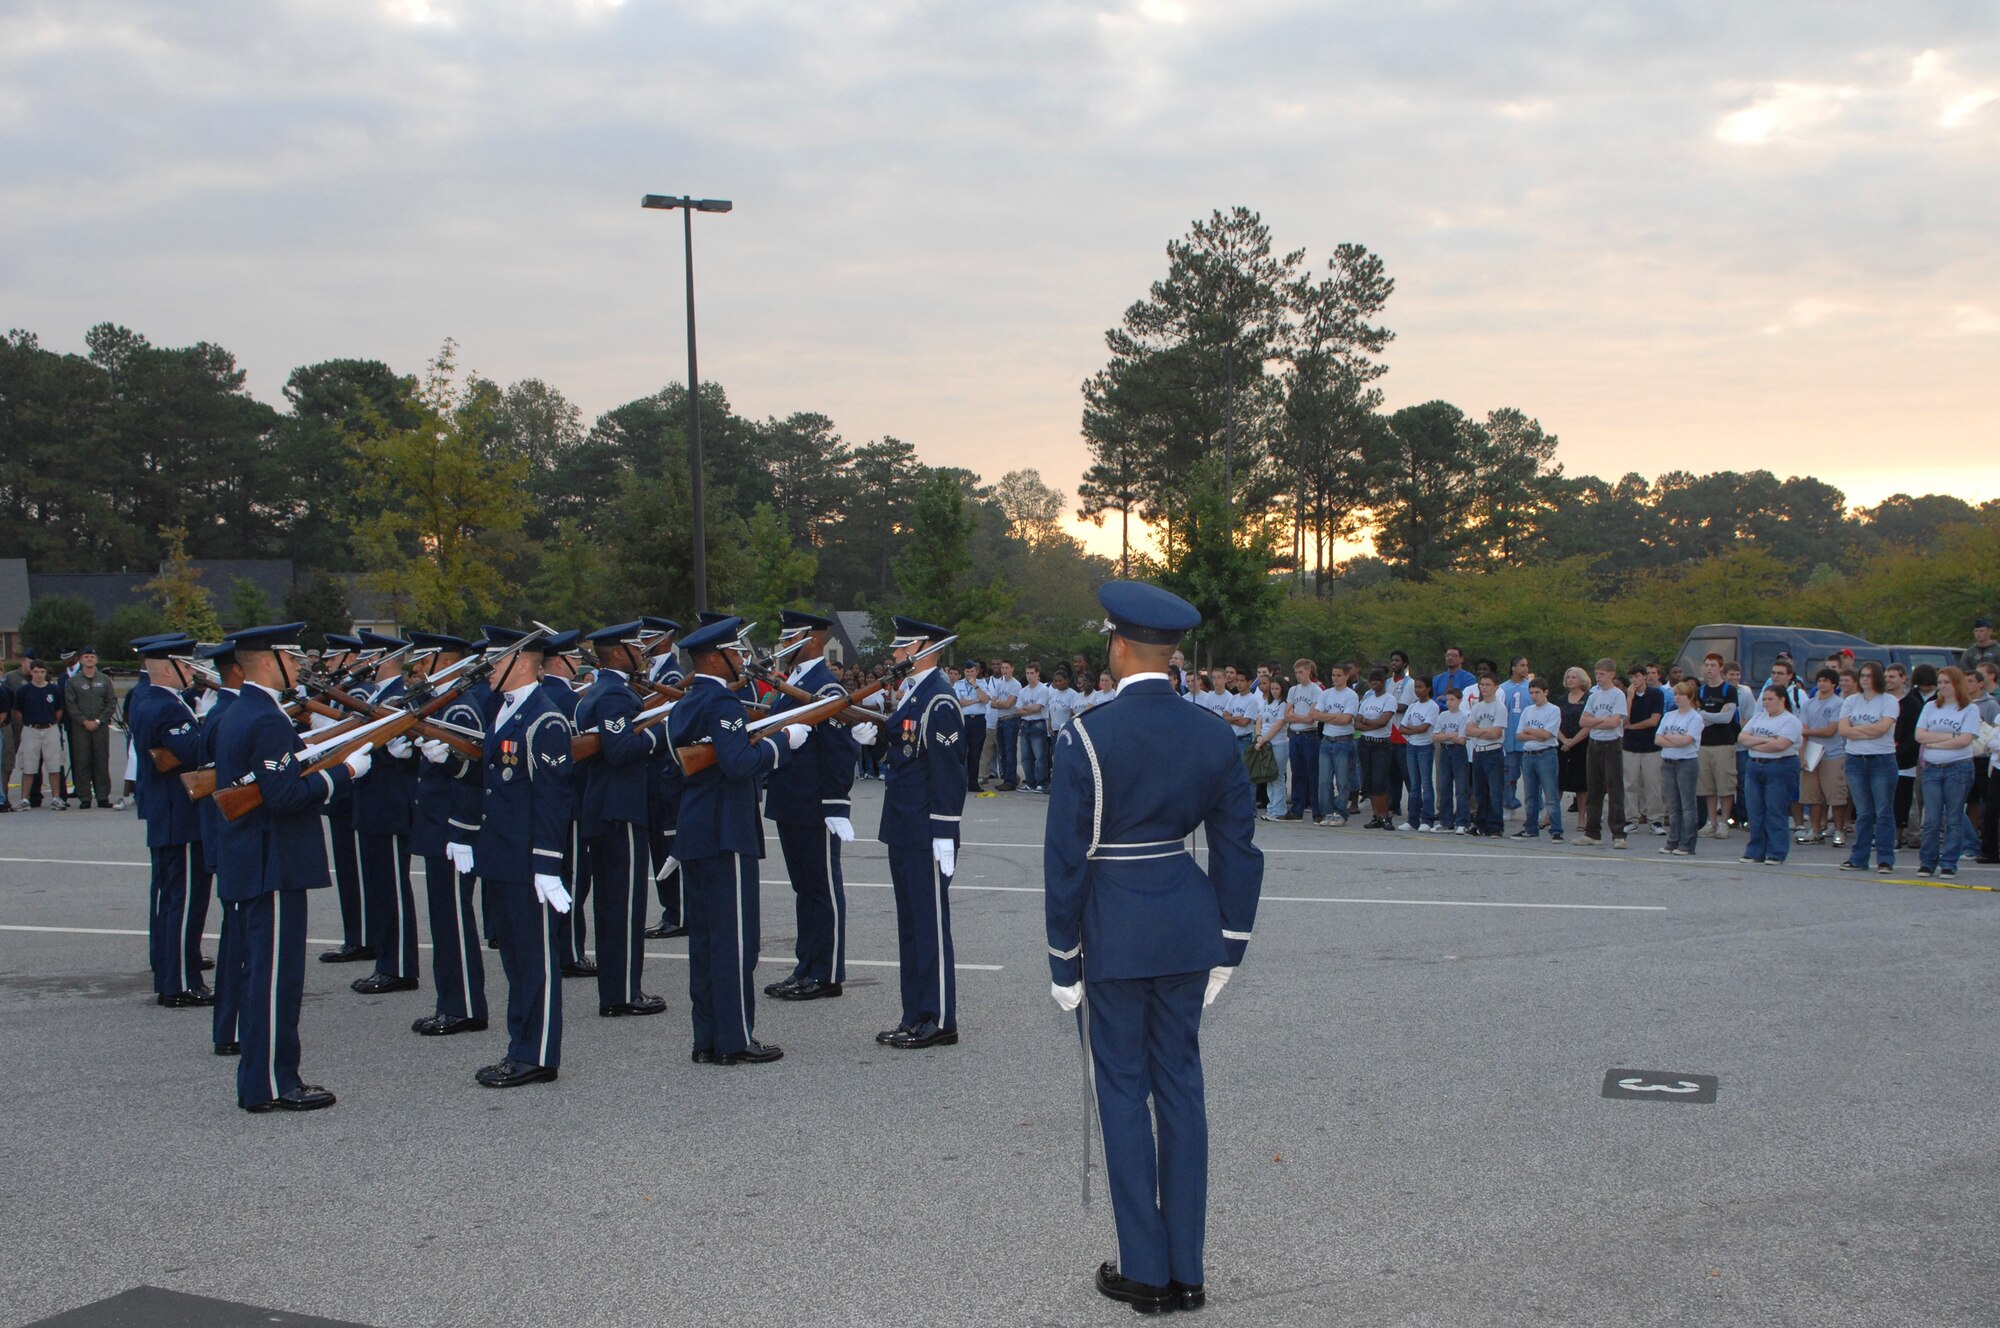 Members of the Air Force Honor Guard Drill Team perform at Marietta High School in Marietta, Ga. on October 9, 2007.  The drill team performed at several area high schools with other Air Force demo teams as part of Air Force Week Atlanta events leading up to the Great Georgia Air Show in Peachtree City, Ga., and promoted the AF mission by showcasing drill performances at public and military venues to recruit, retain, and inspire Airmen. ( U.S. Air Force photo/Airman First Class Tim Chacon)(Released)